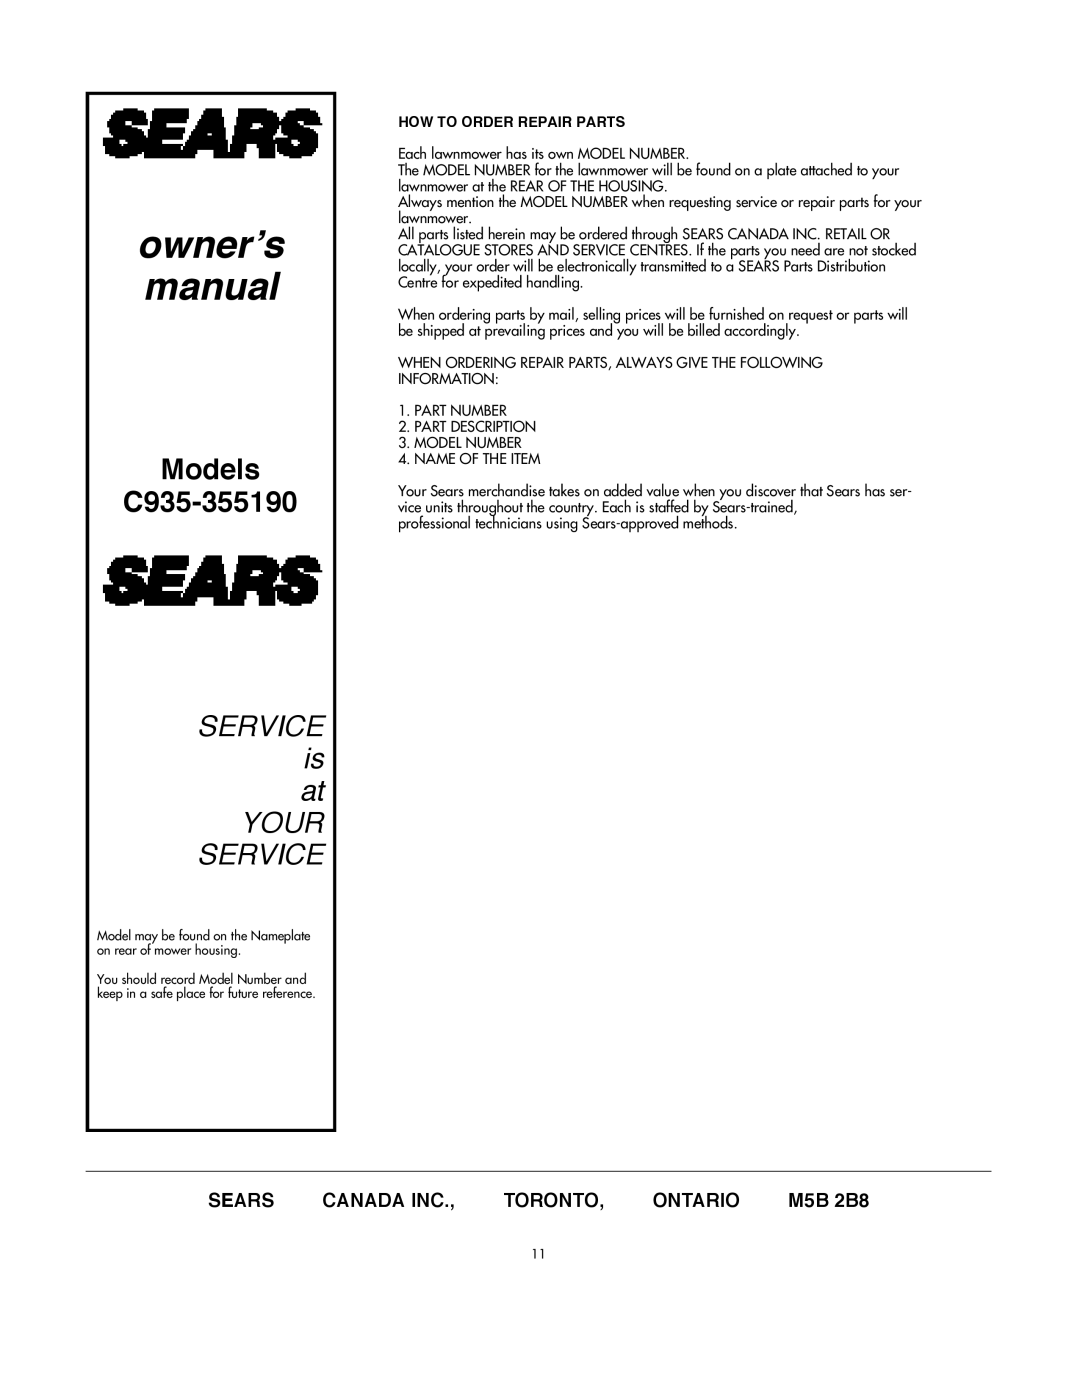 DeWalt Models C935-355190, Sears, Canada Inc, Toronto, Ontario, How To Order Repair Parts, SERVICE is at YOUR SERVICE 